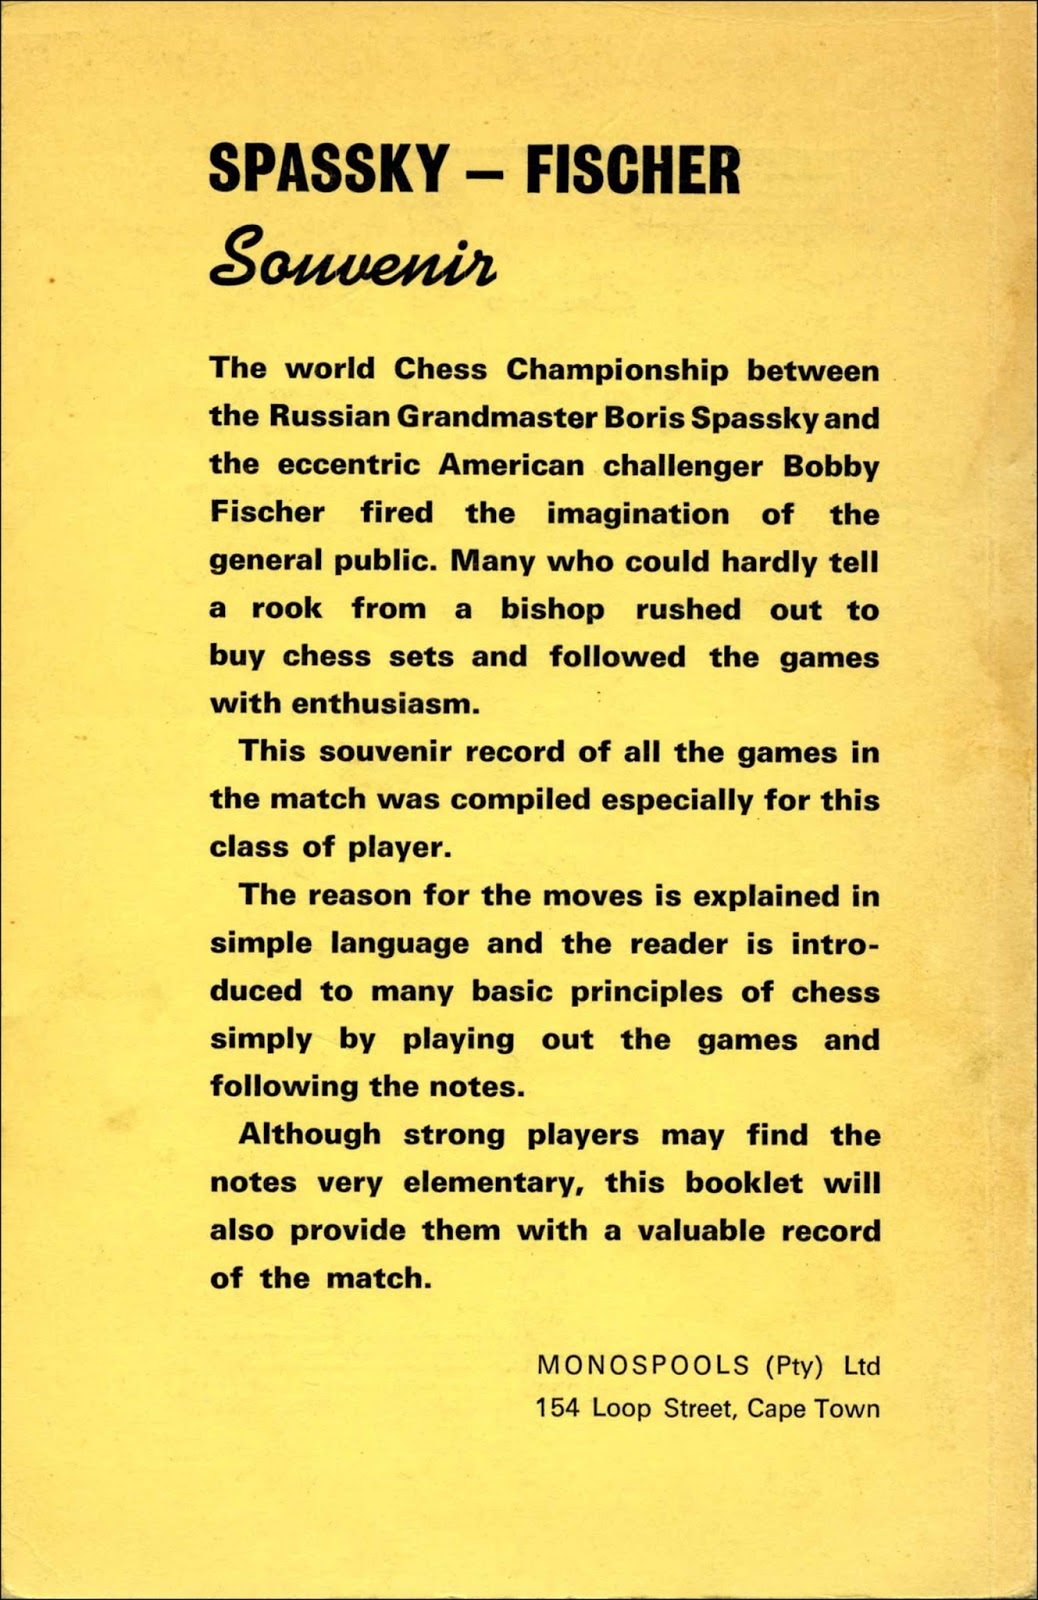 1972 WC, Fischer-Spassky by Evans and Smith OCR, PDF, World Chess  Championships